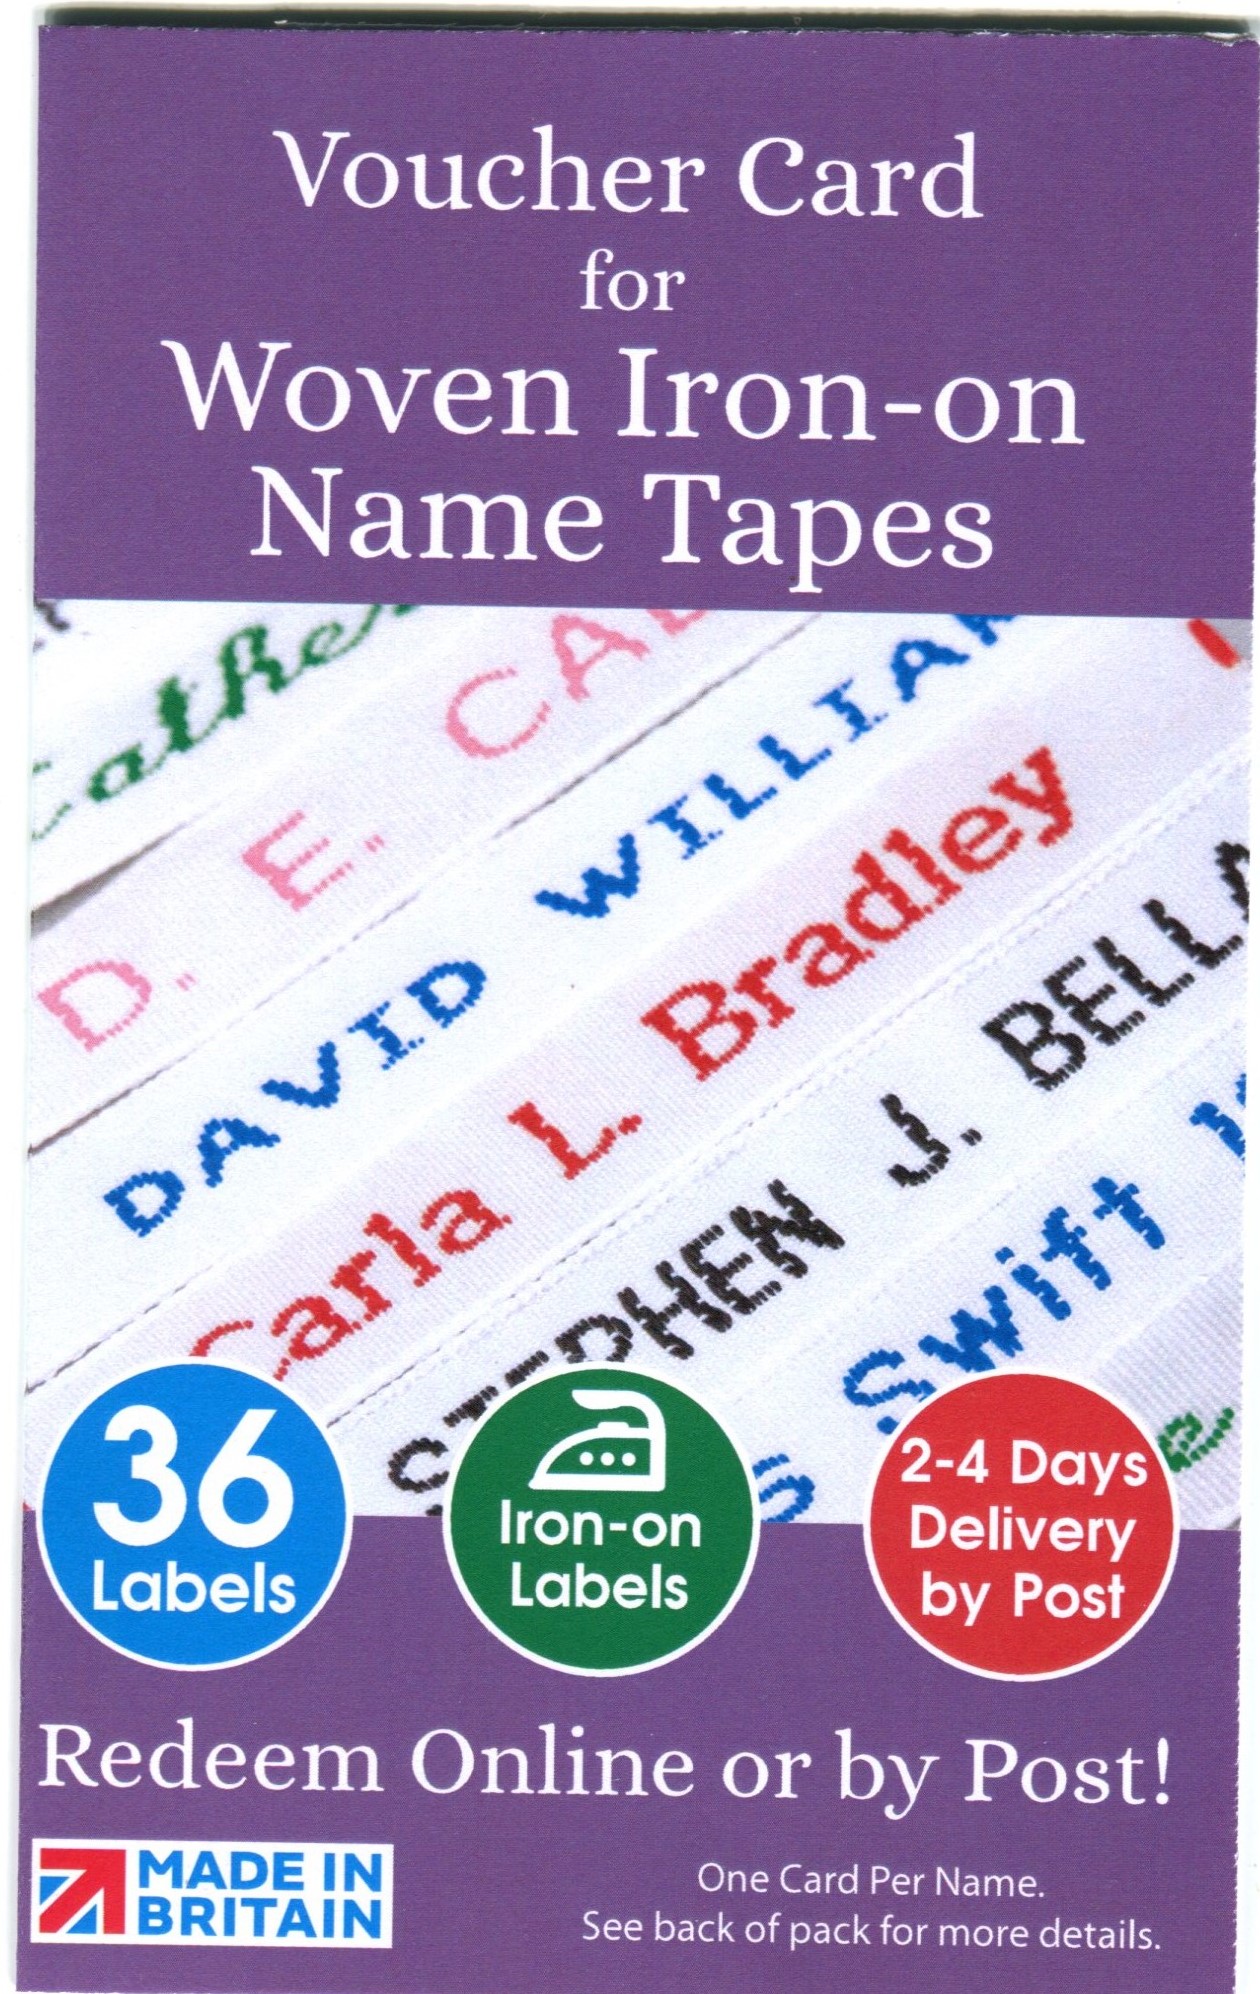 IRON-ON WOVEN NAME TAPE 36 LABELS 1 CARD NTIH/36